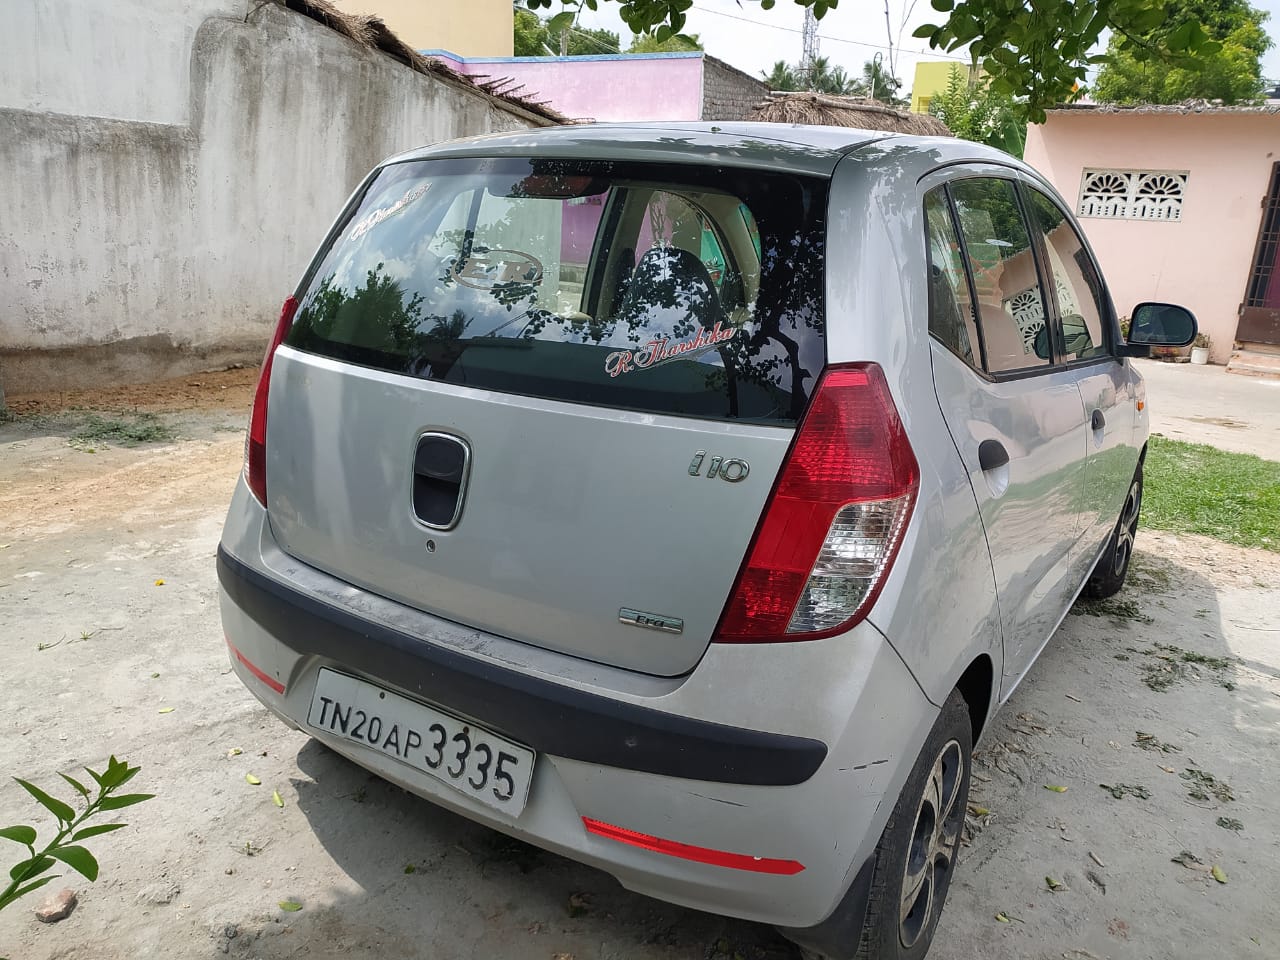 4744-for-sale-Hyundai-i10-Petrol-Third-Owner-2007-TN-registered-rs-115000